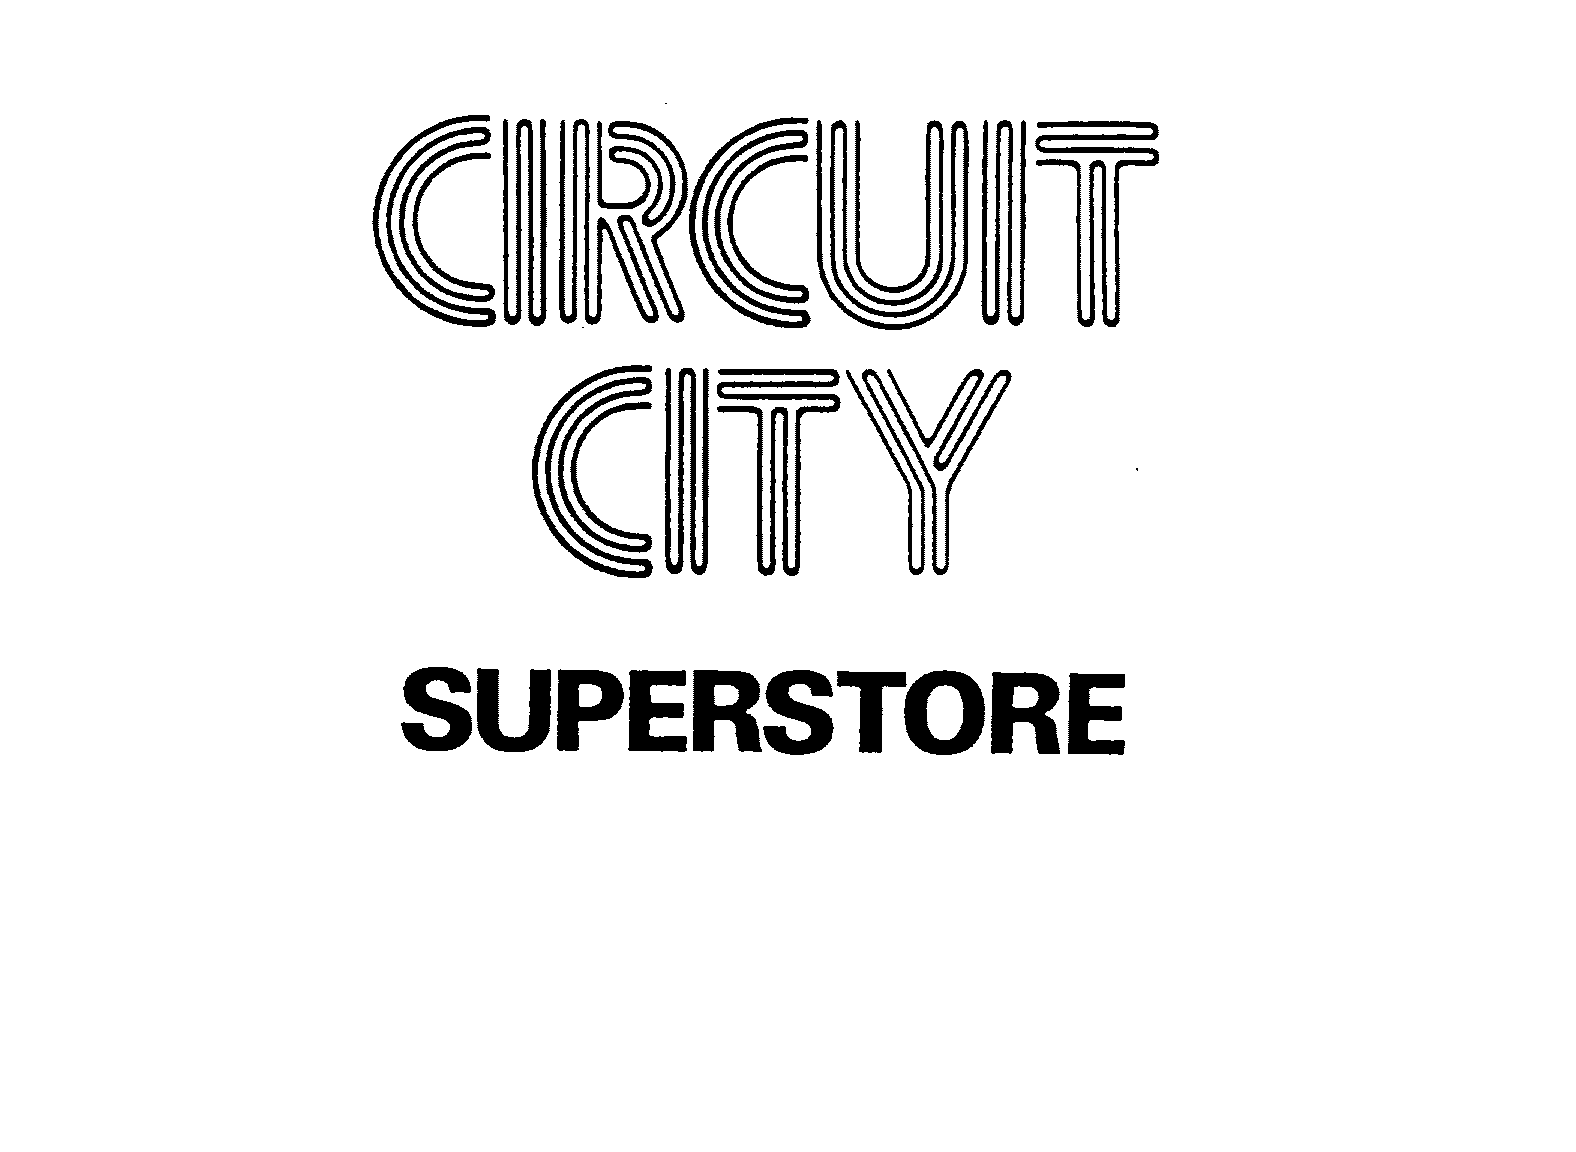  CIRCUIT CITY SUPERSTORE